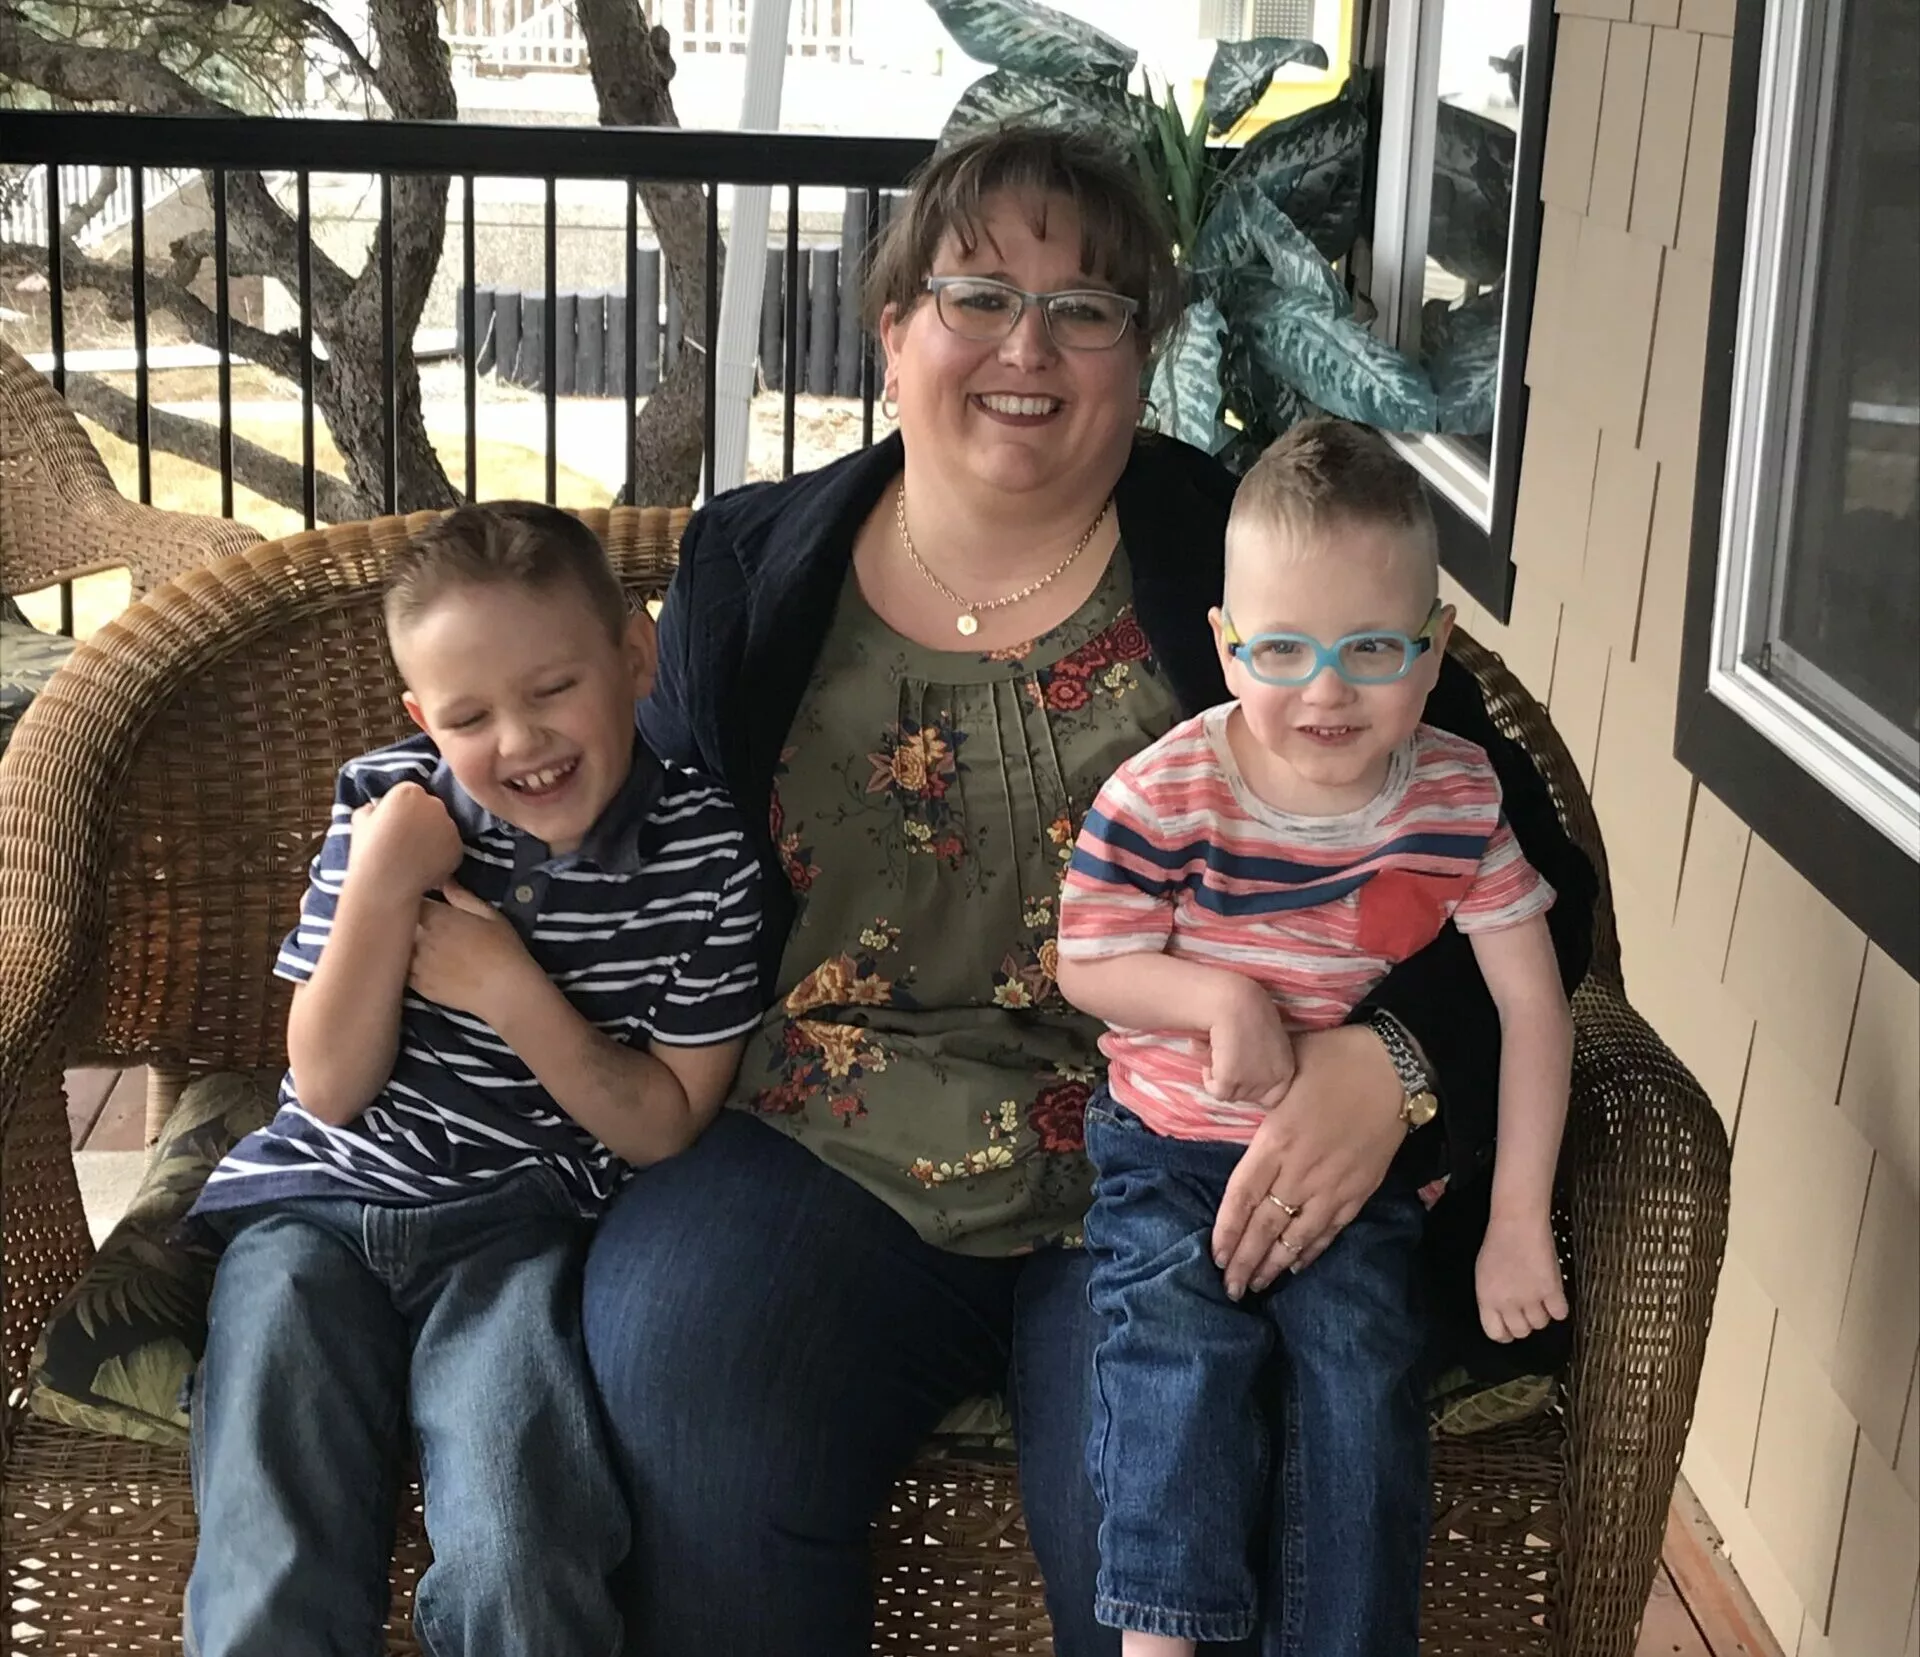 stollery kid cameron with brother and mom sitting on front porch bench